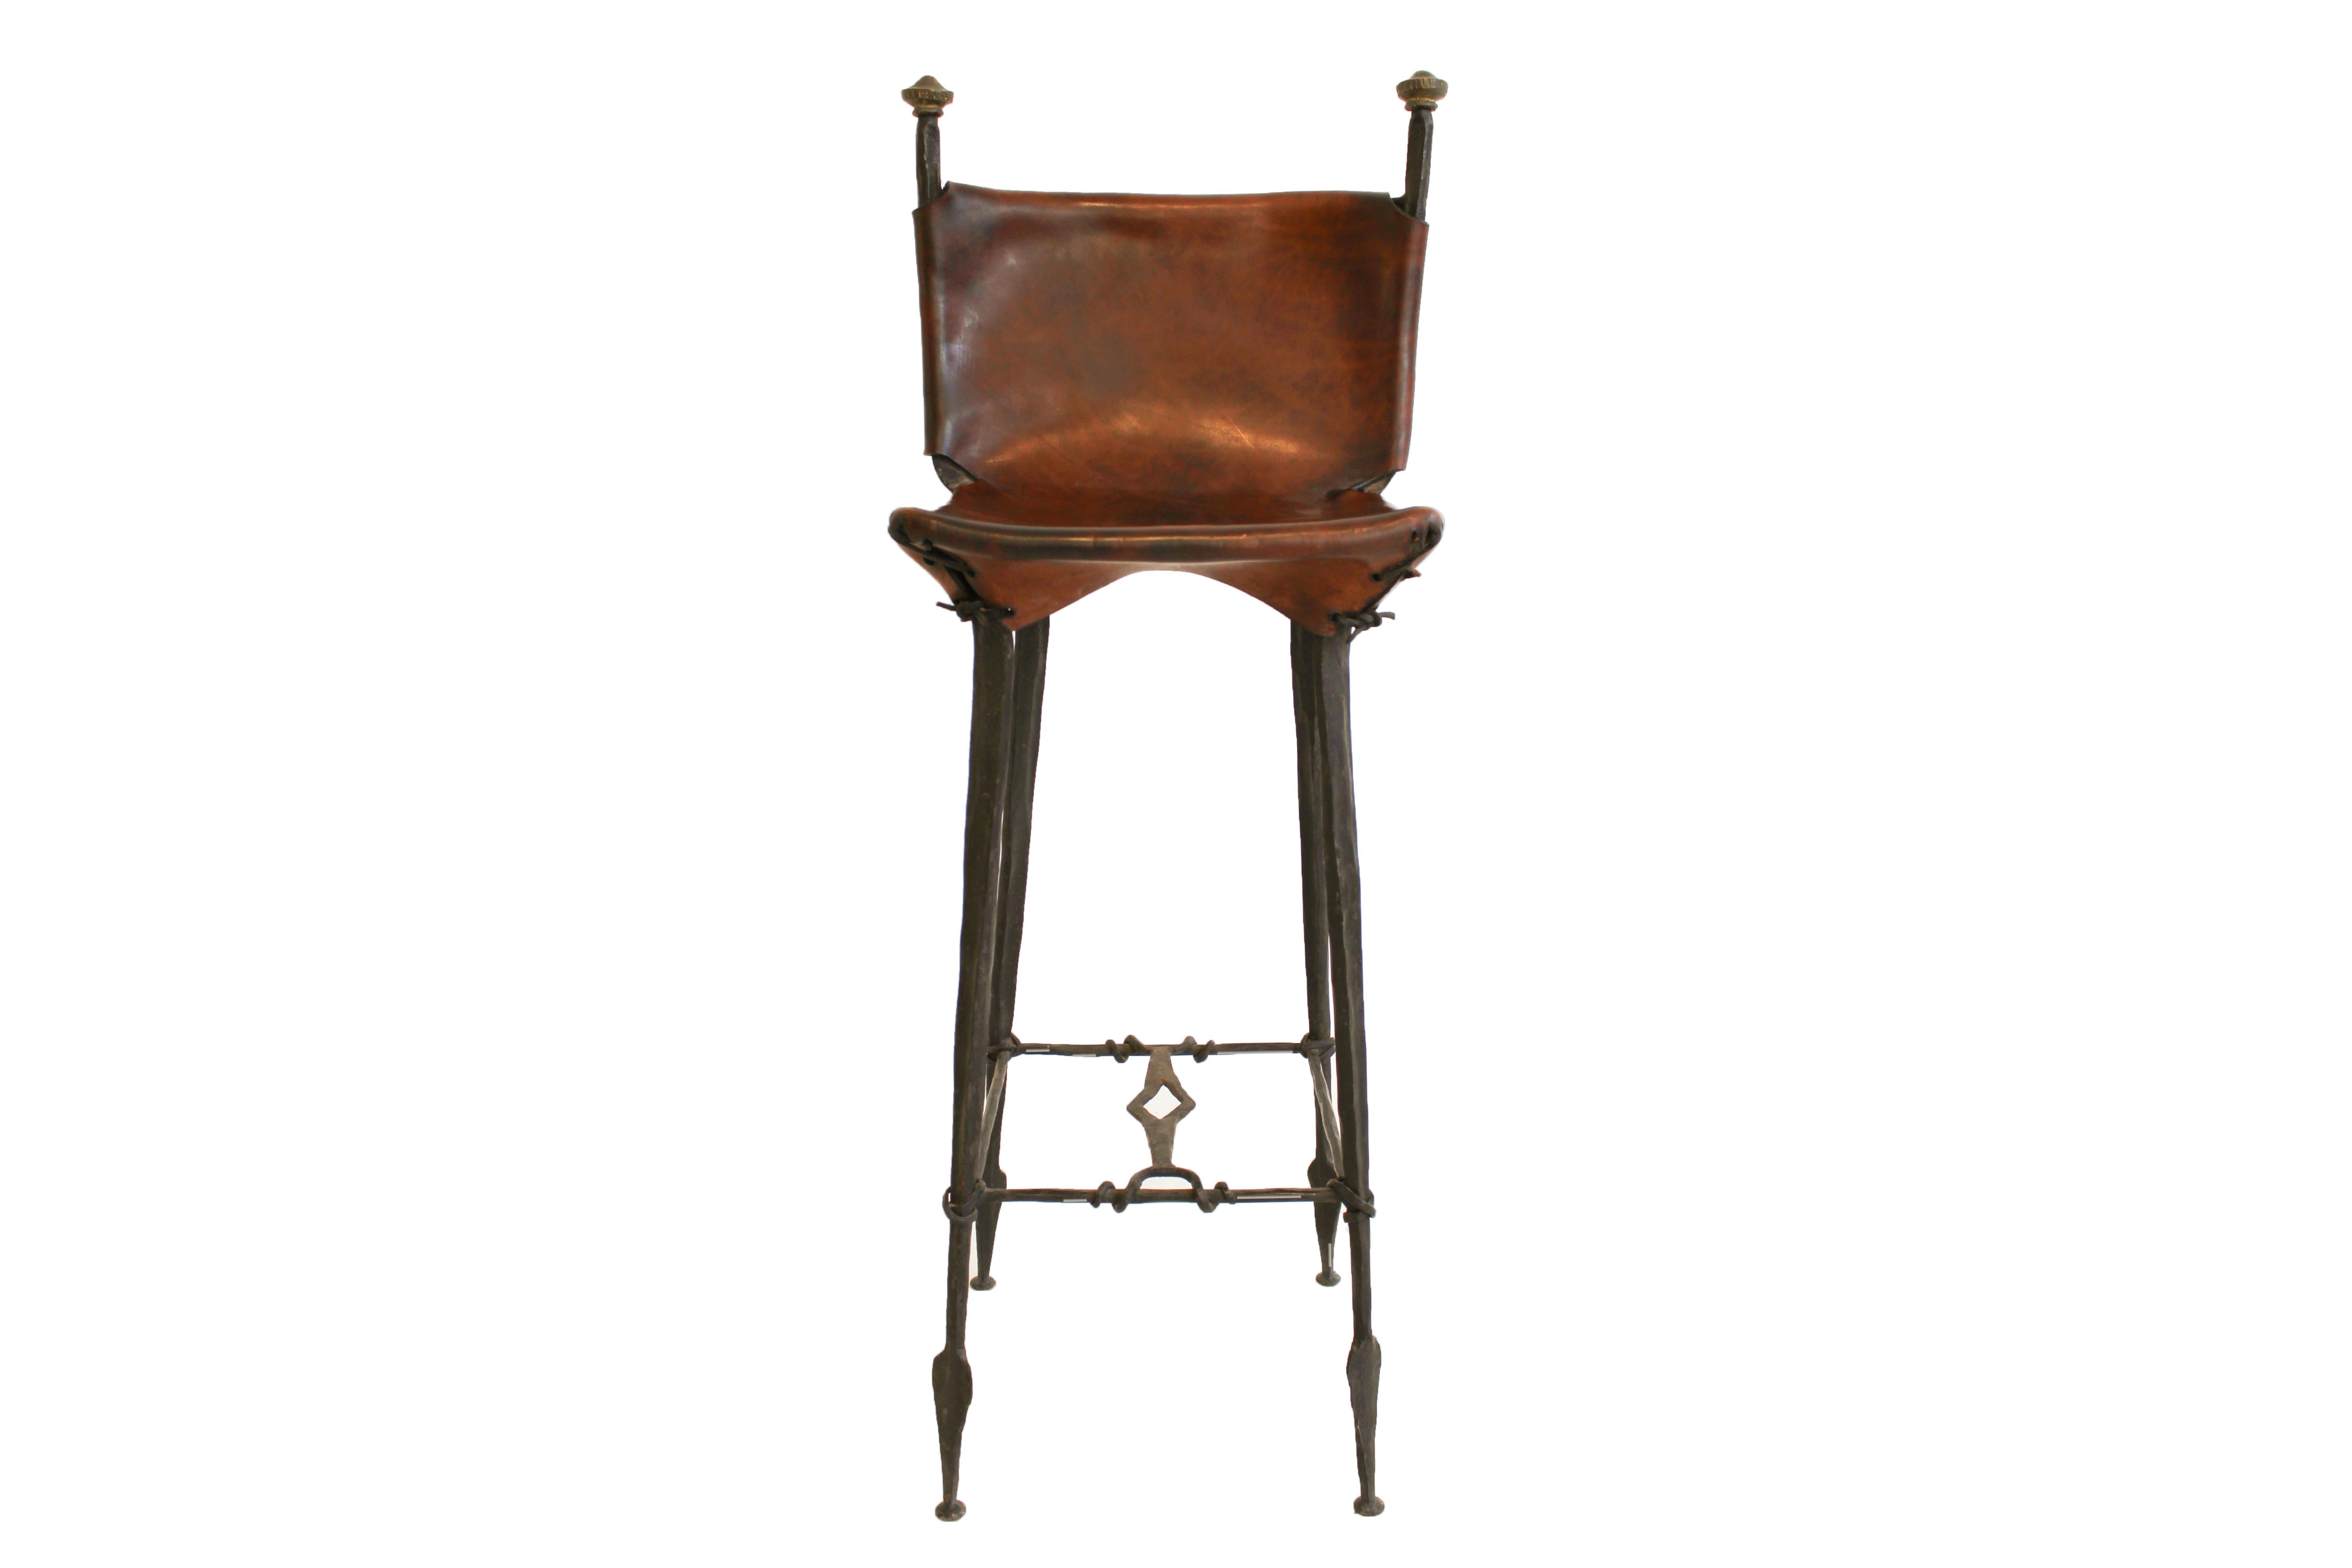 Pair of Sido and François Thevenin bar stool.
Made with forged iron and leather.
Stamped in the back.
Circa 1970, France.
Very good vintage condition.
Born on the Côte d’Azur in 1931, François Thévenin was an artist, architect, sculptor,